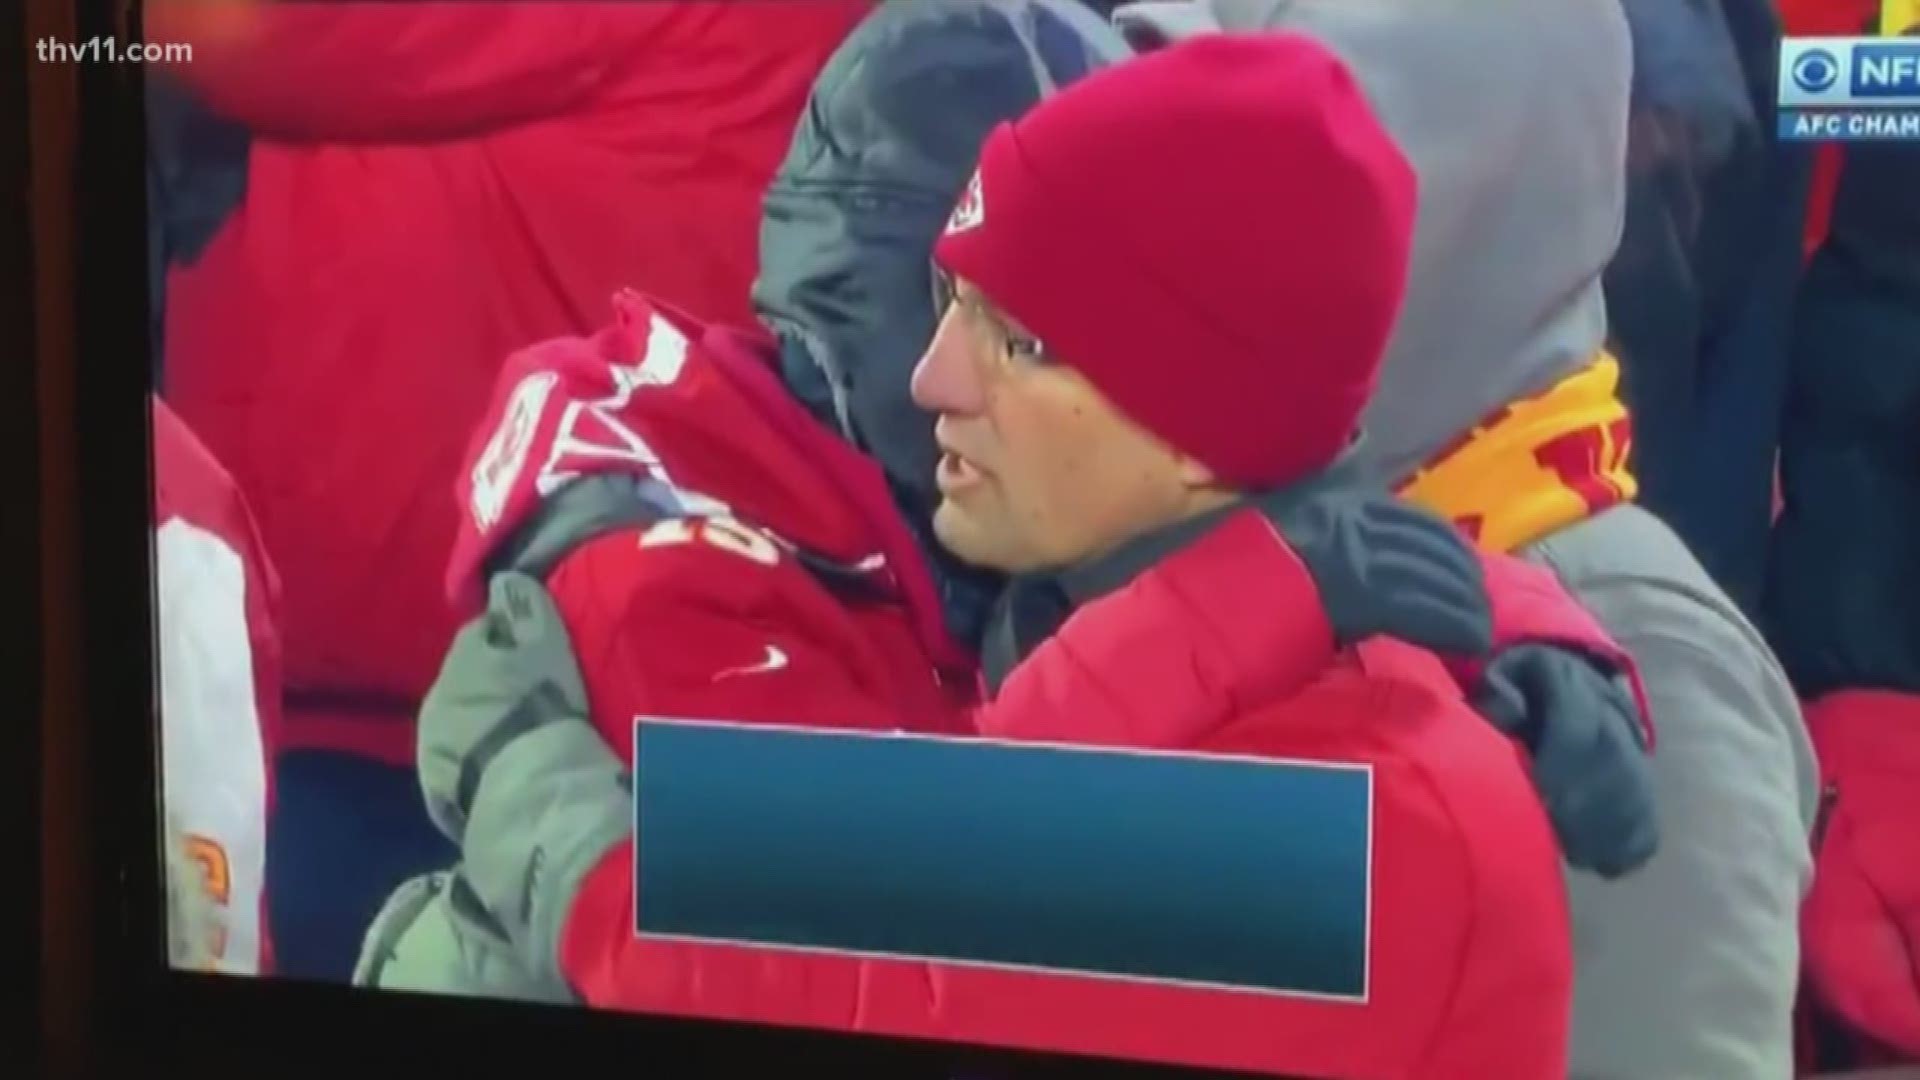 A touching moment was caught on camera of a father consoling his son after a Chiefs game last January. That father-son duo is right here from Little Rock.